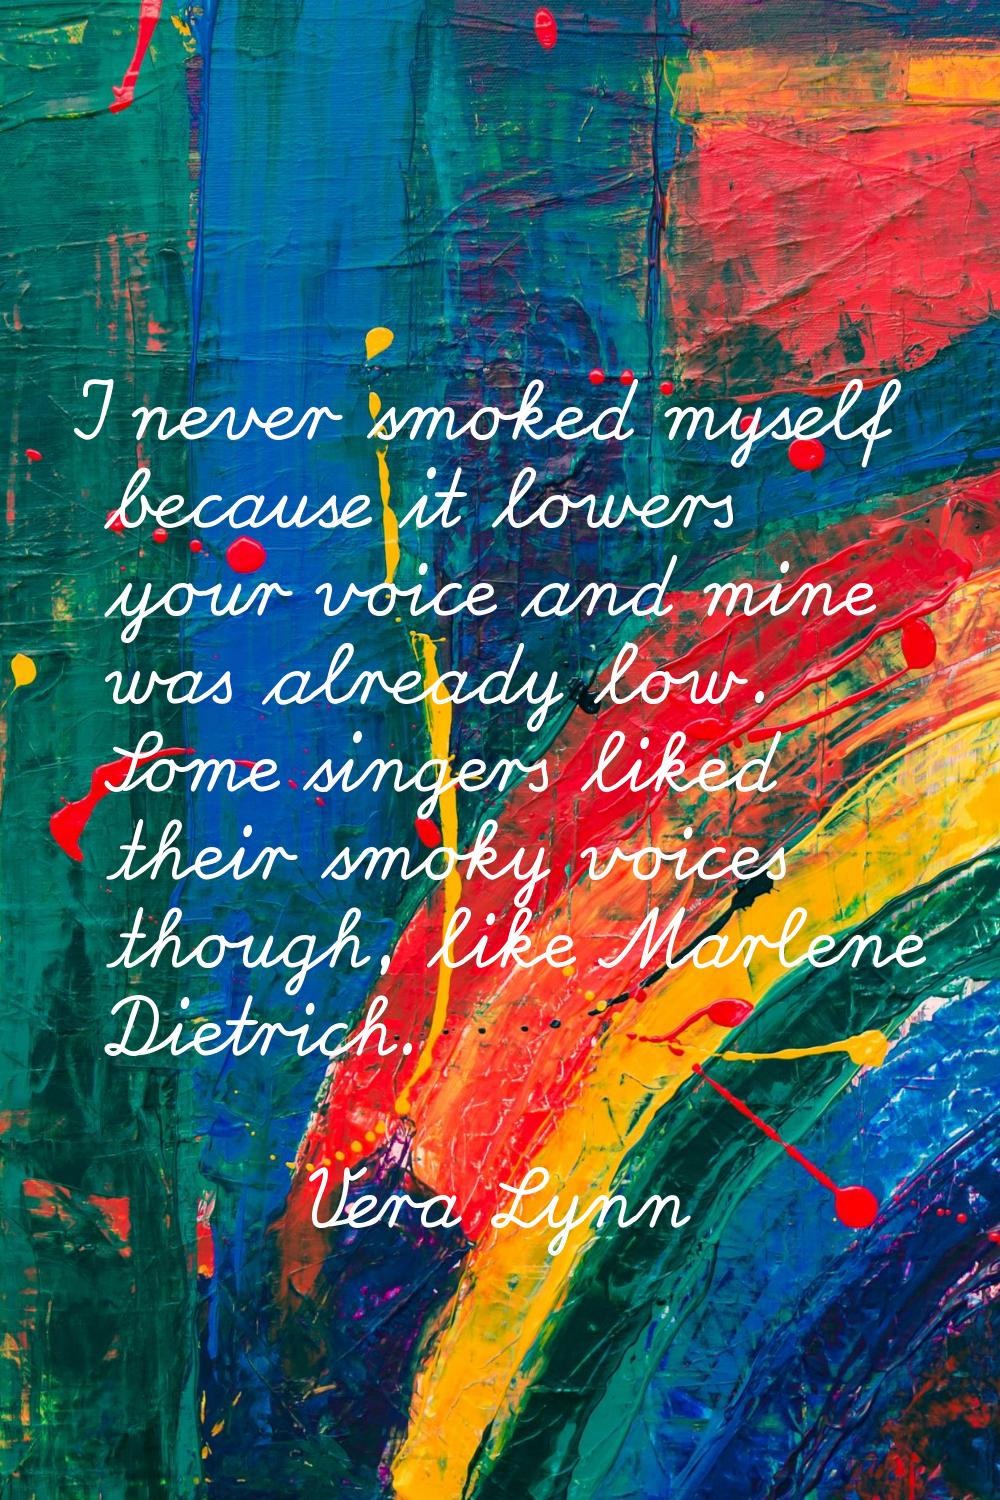 I never smoked myself because it lowers your voice and mine was already low. Some singers liked the